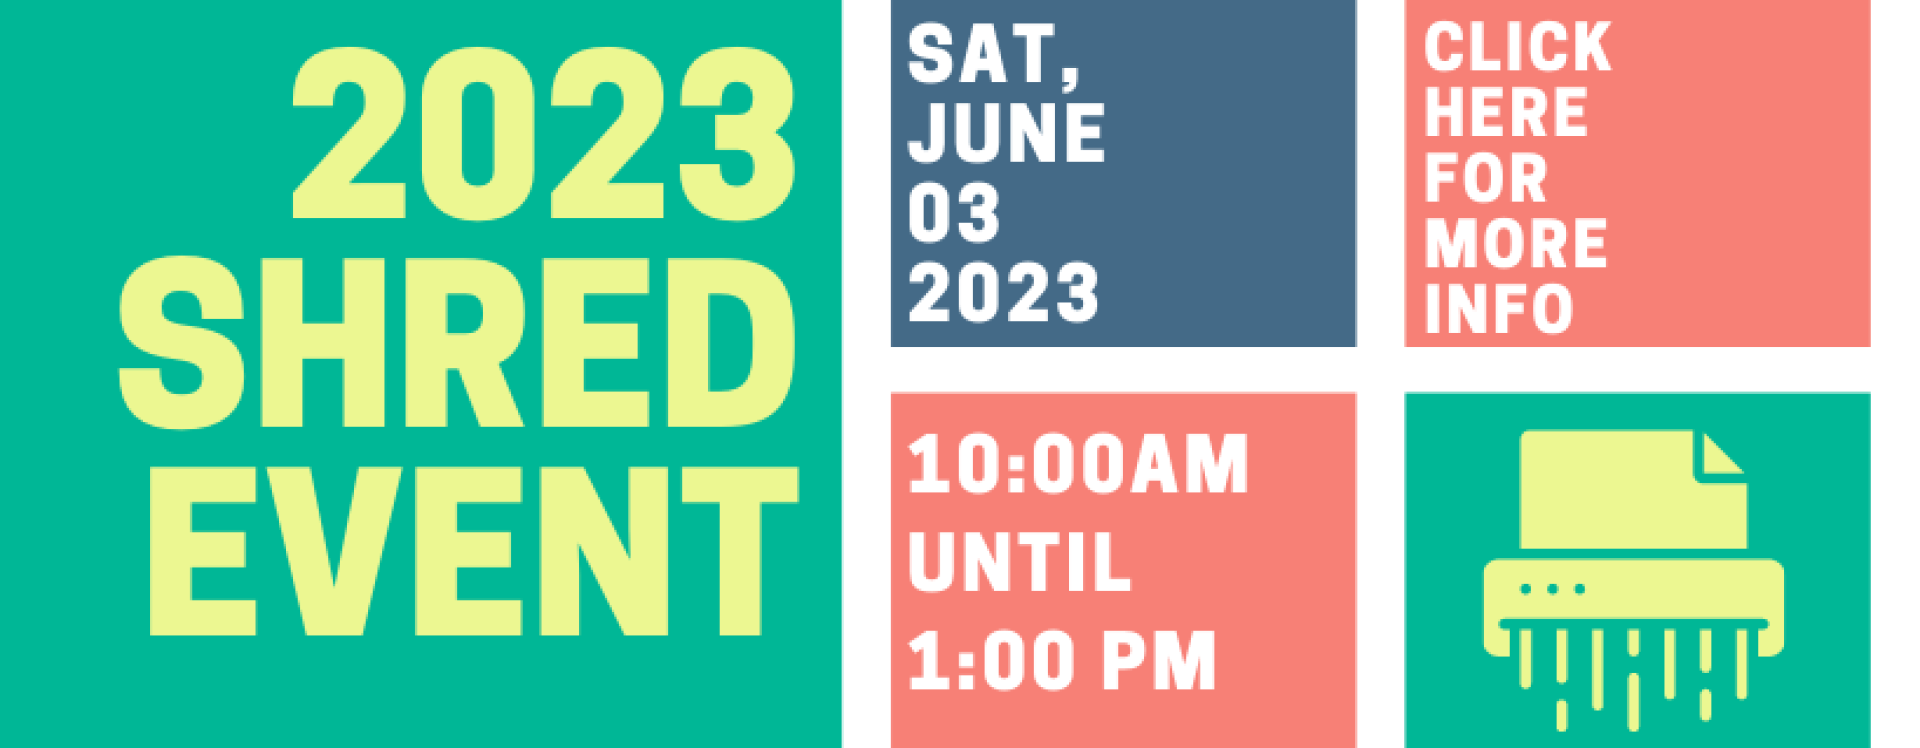 2023 shred event - click here for more info!